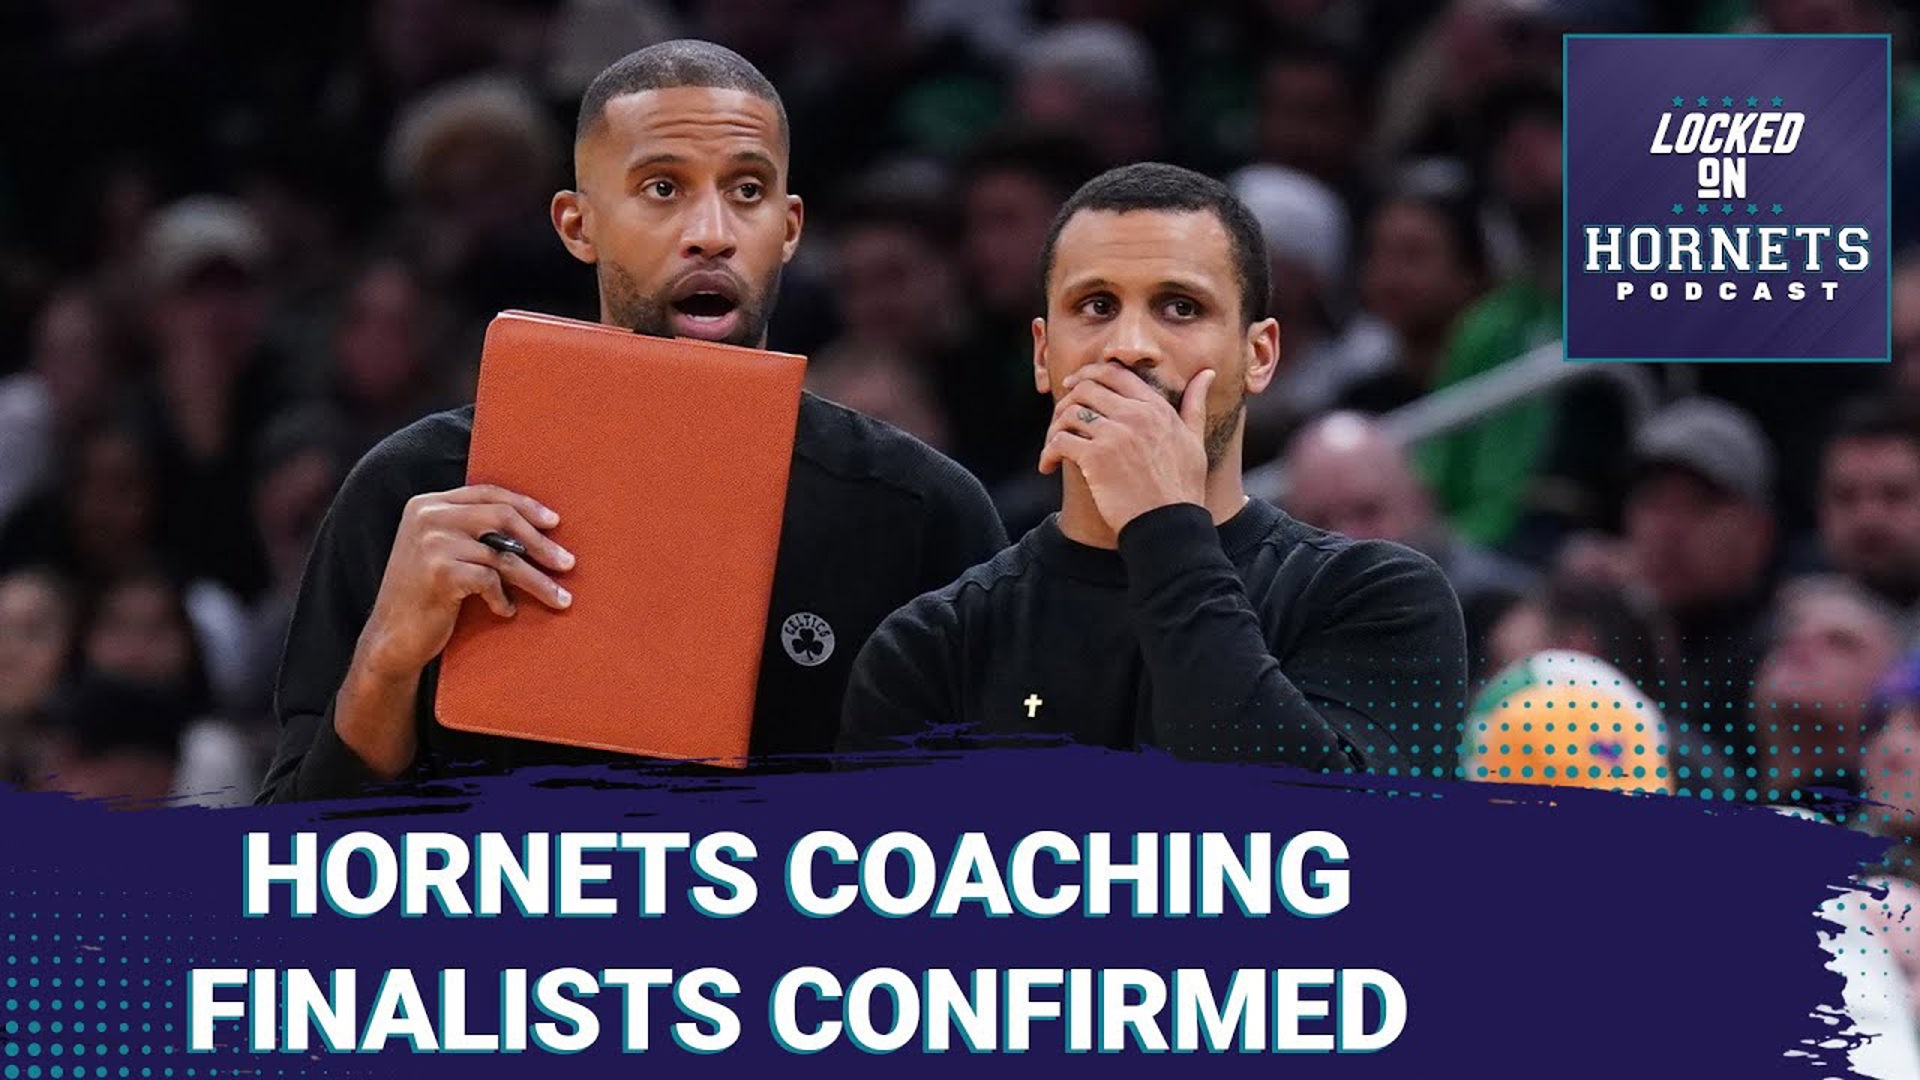 Coaching finalists confirmed? + the have NOT been on the same